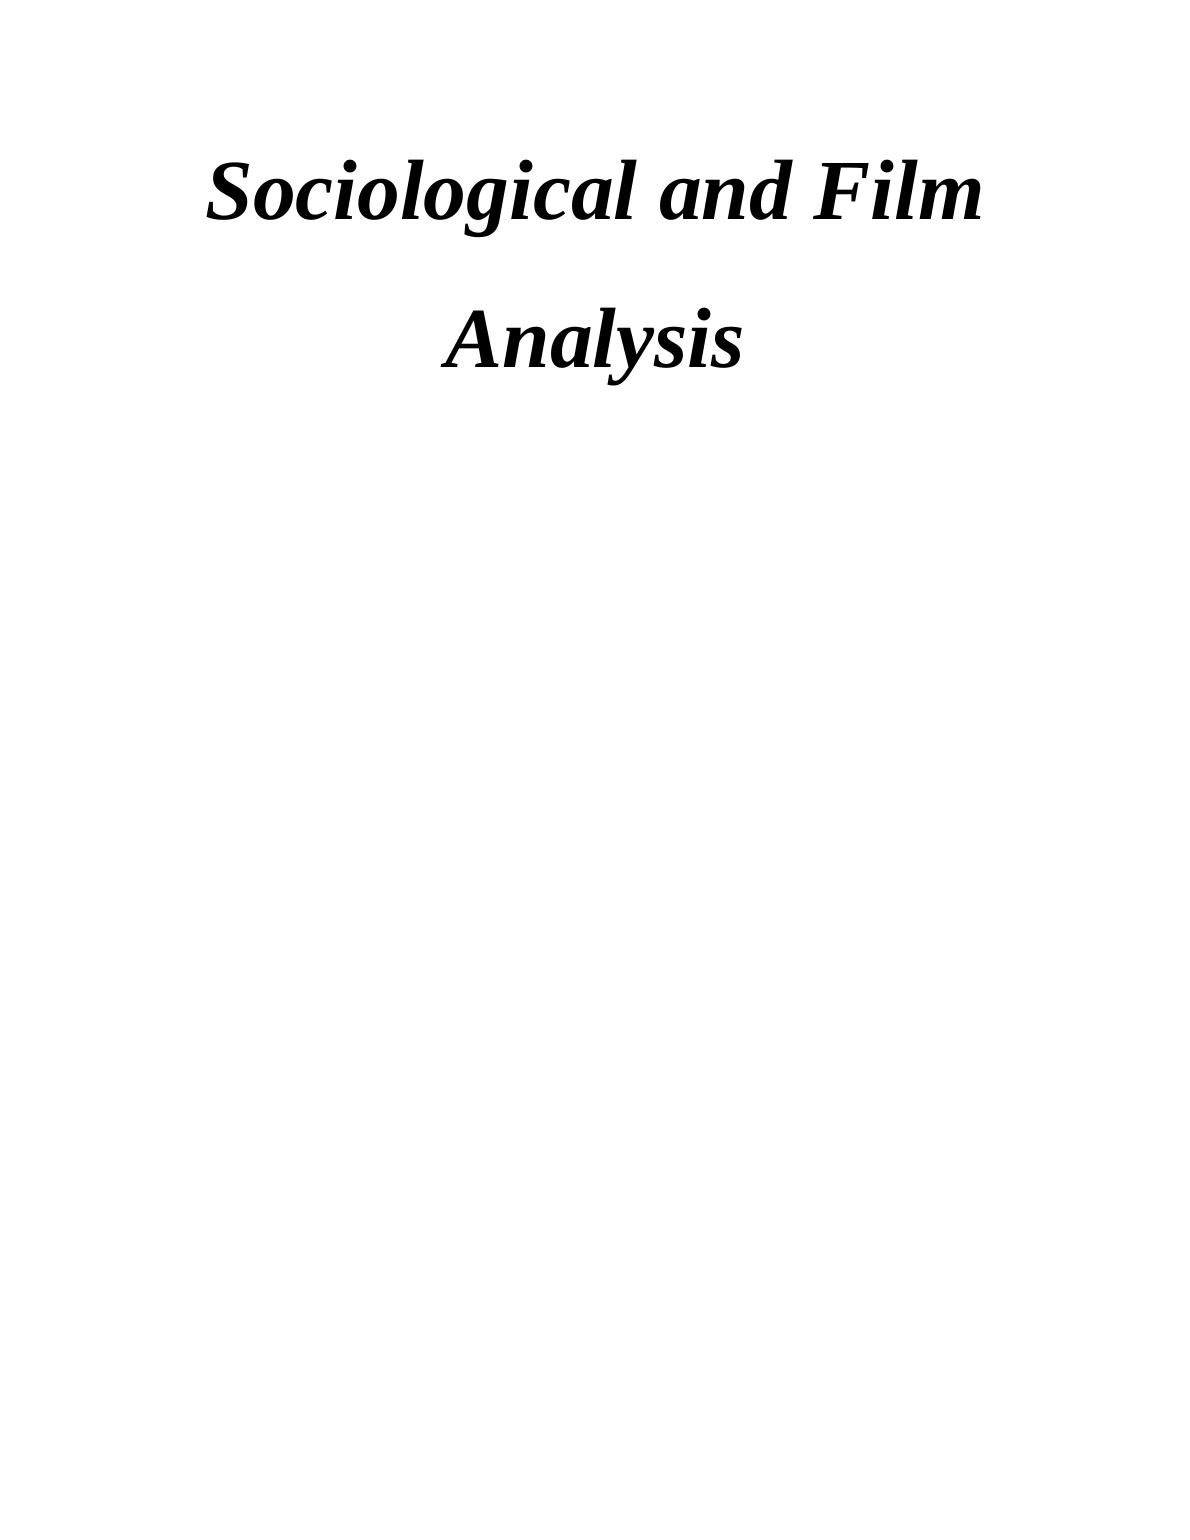 Sociological and Film Analysis_1